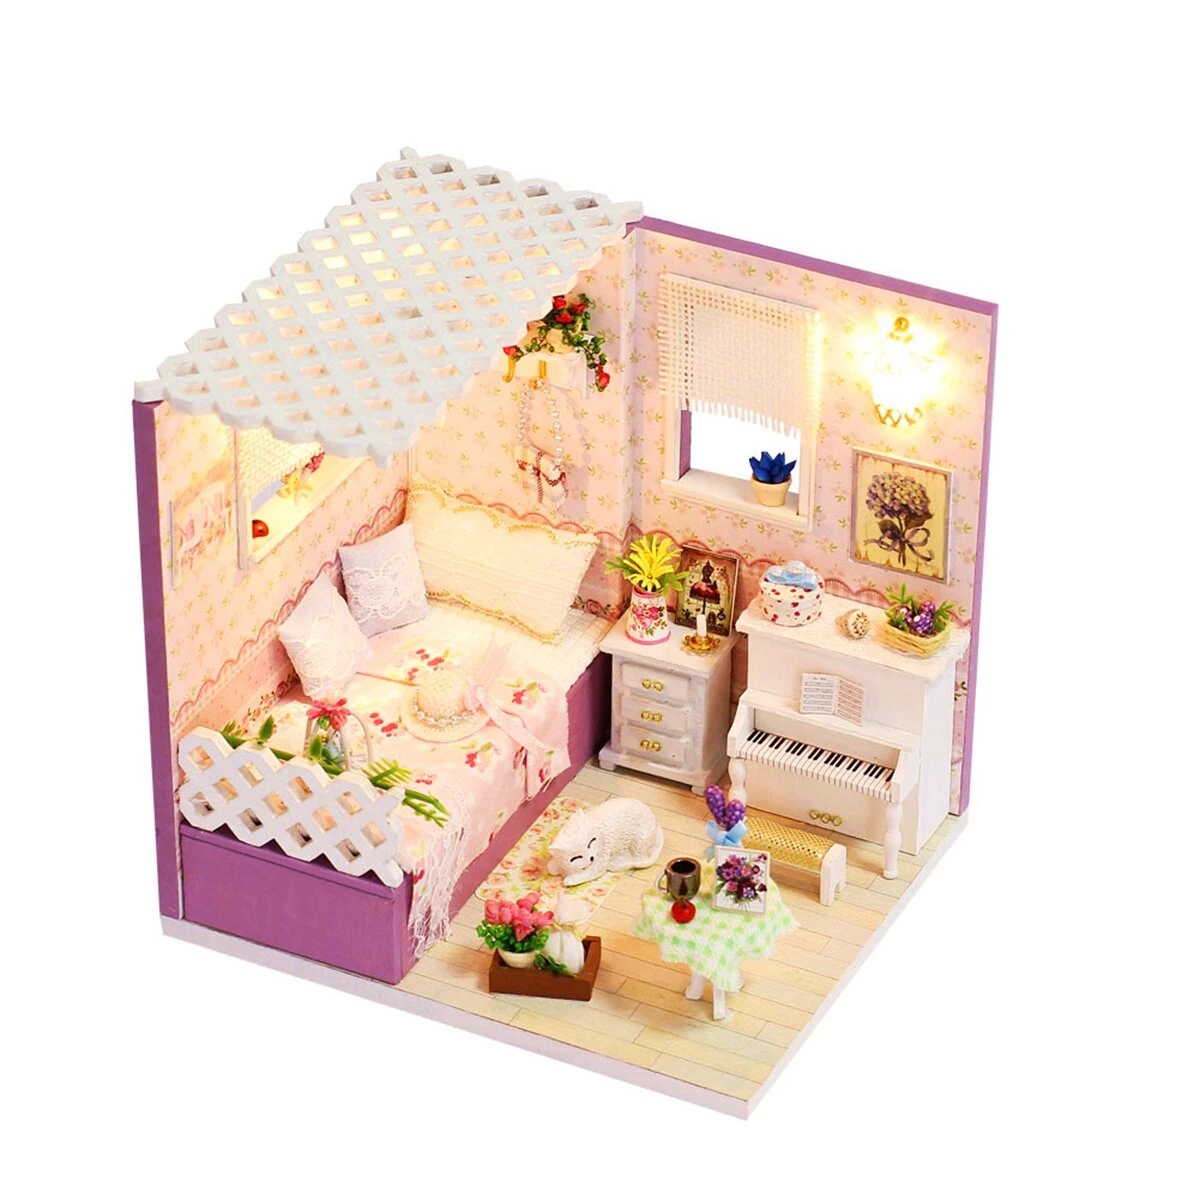 Diy wooden doll house room furniture set led light miniature girl princess christmas room puzzle toy gift decor